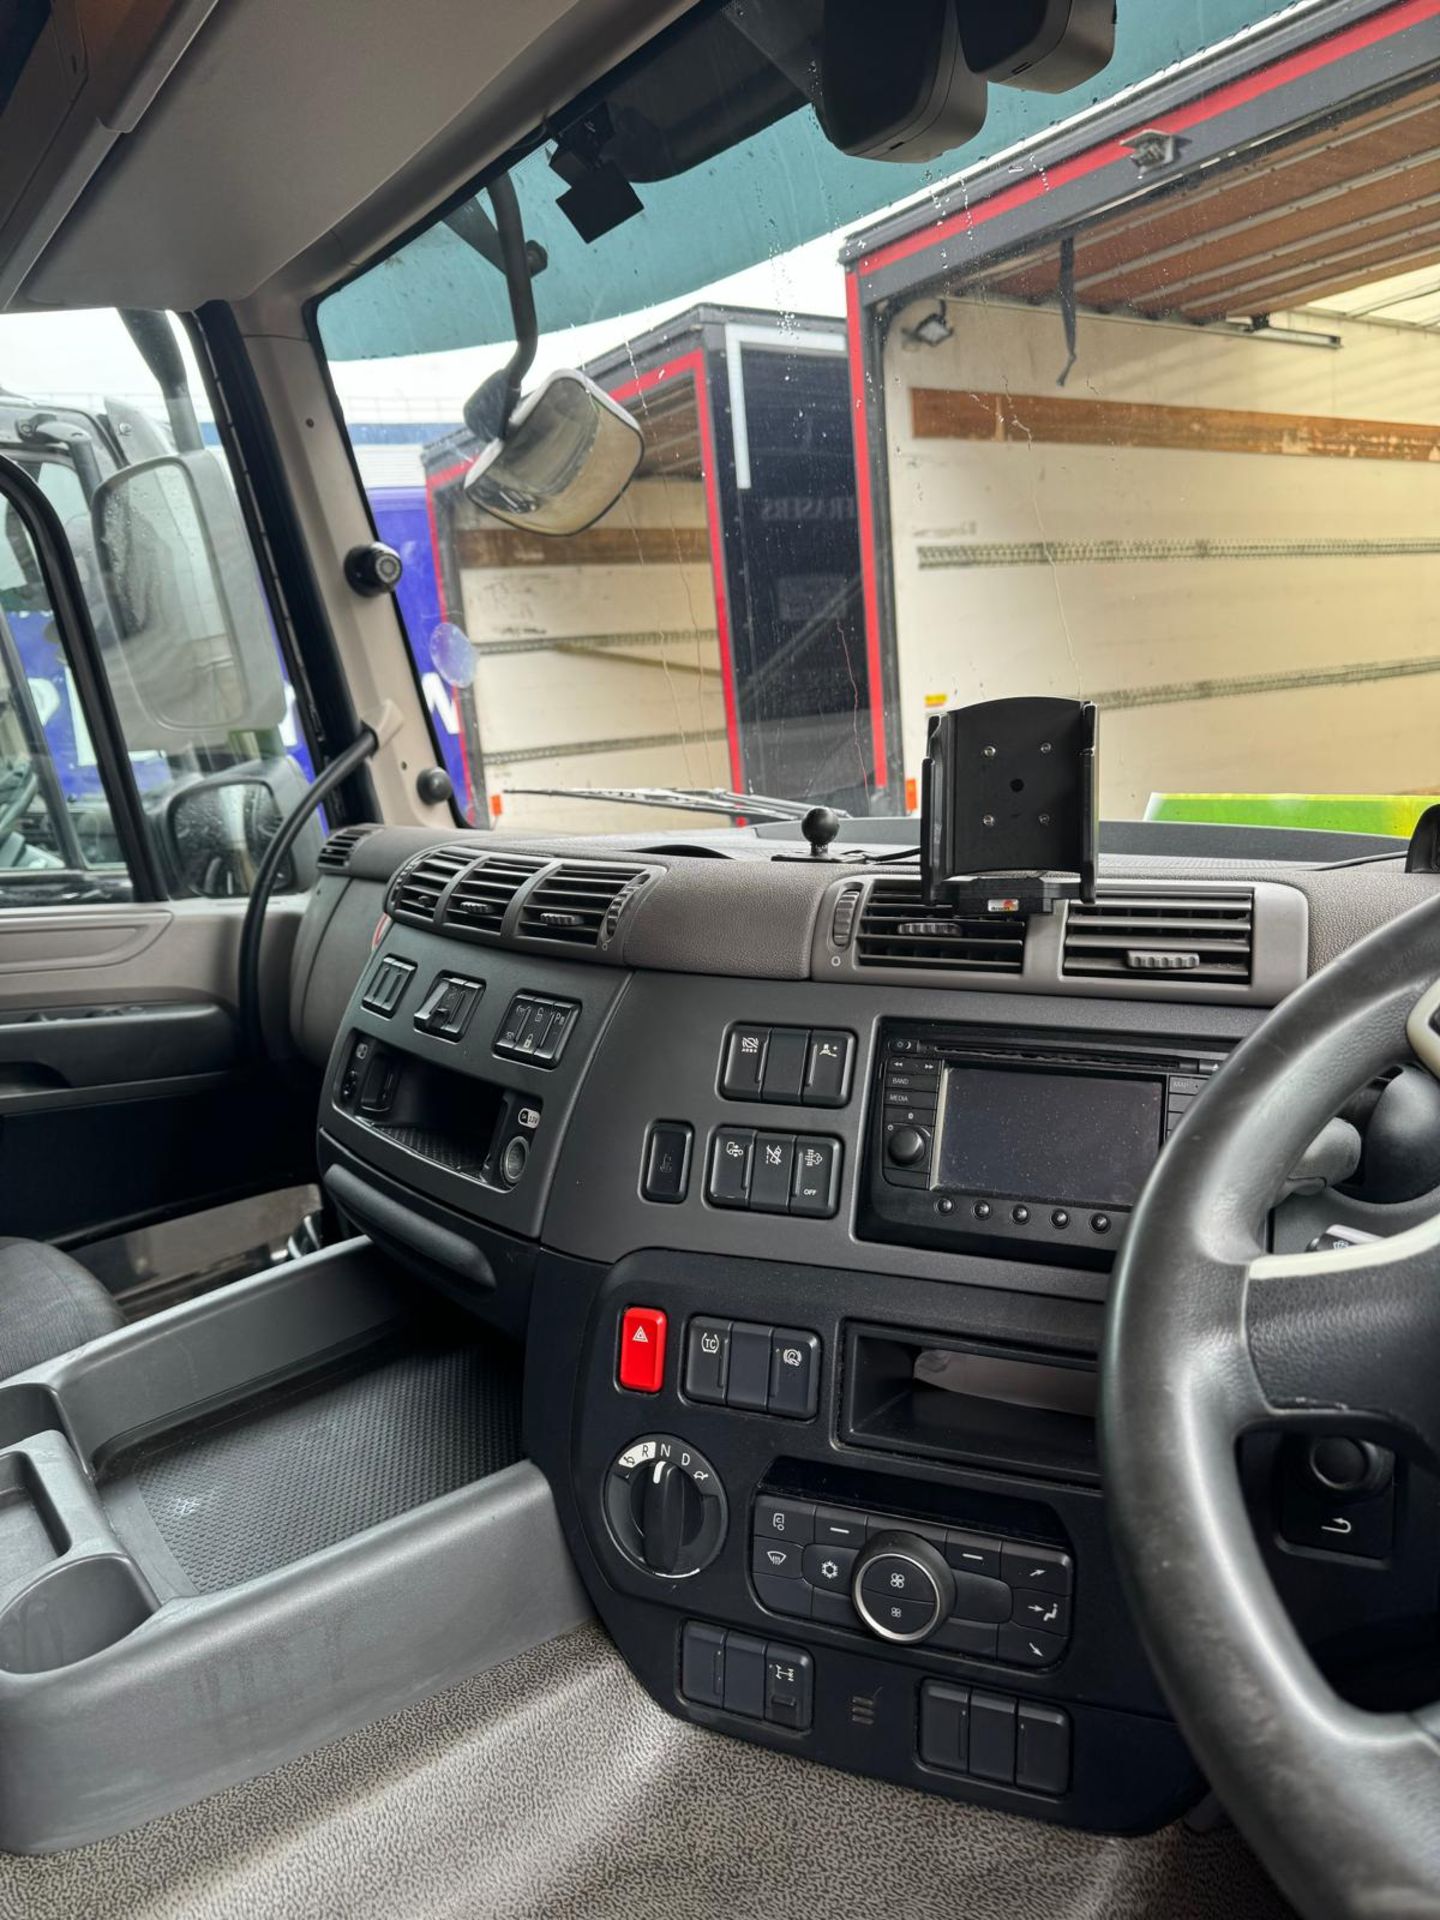 2019, DAF CF 260 FA (Ex-Fleet Owned & Maintained) - FN69 AXD (18 Ton Rigid Truck with Tail Lift) - Image 11 of 11